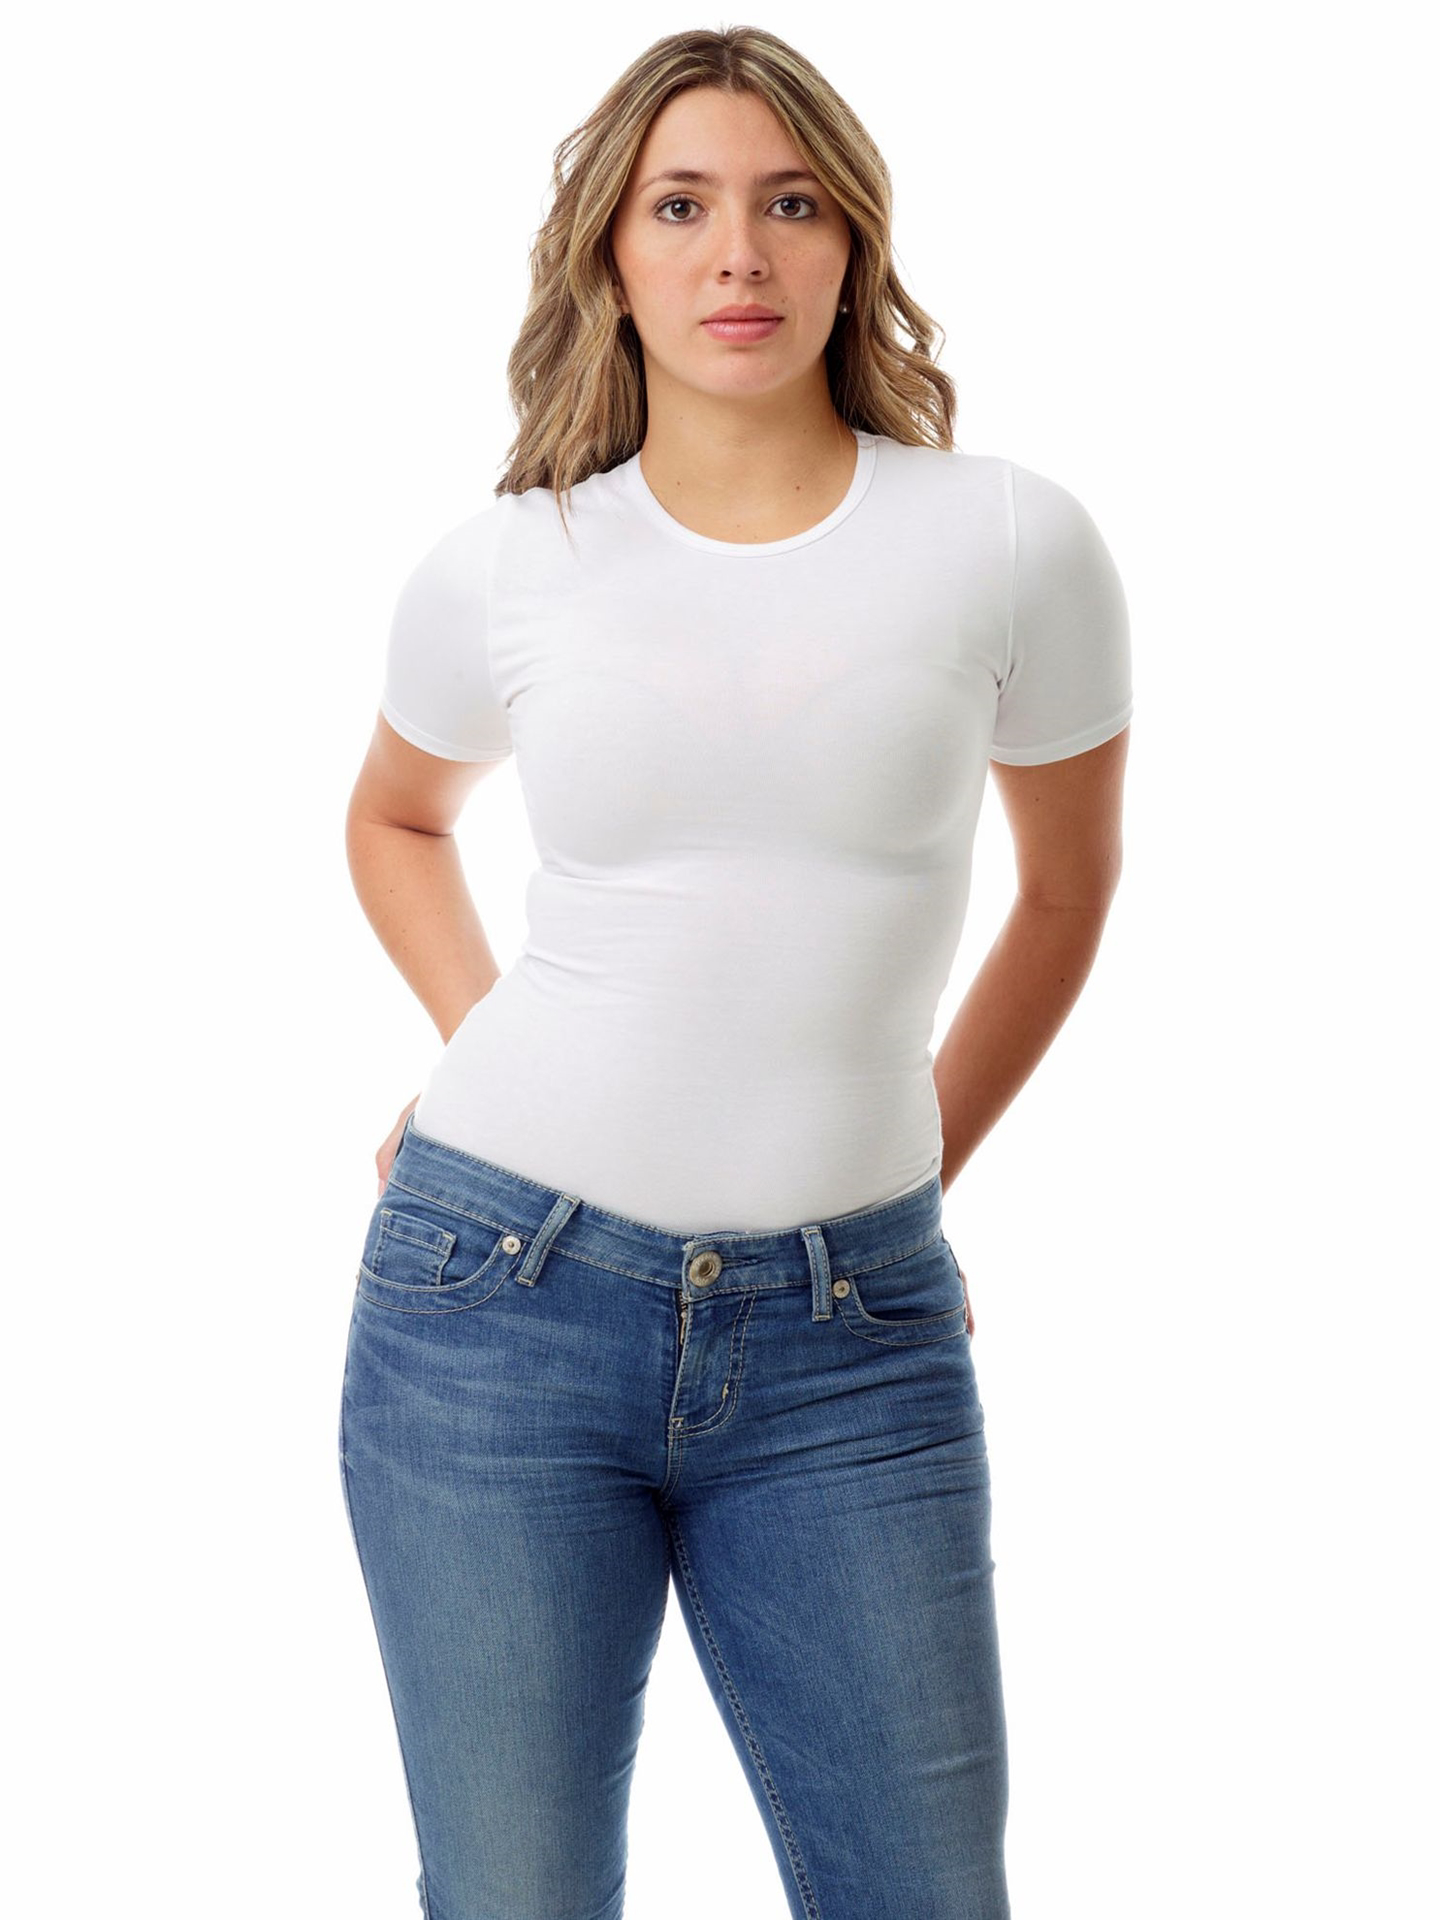 Compression Tops For Women